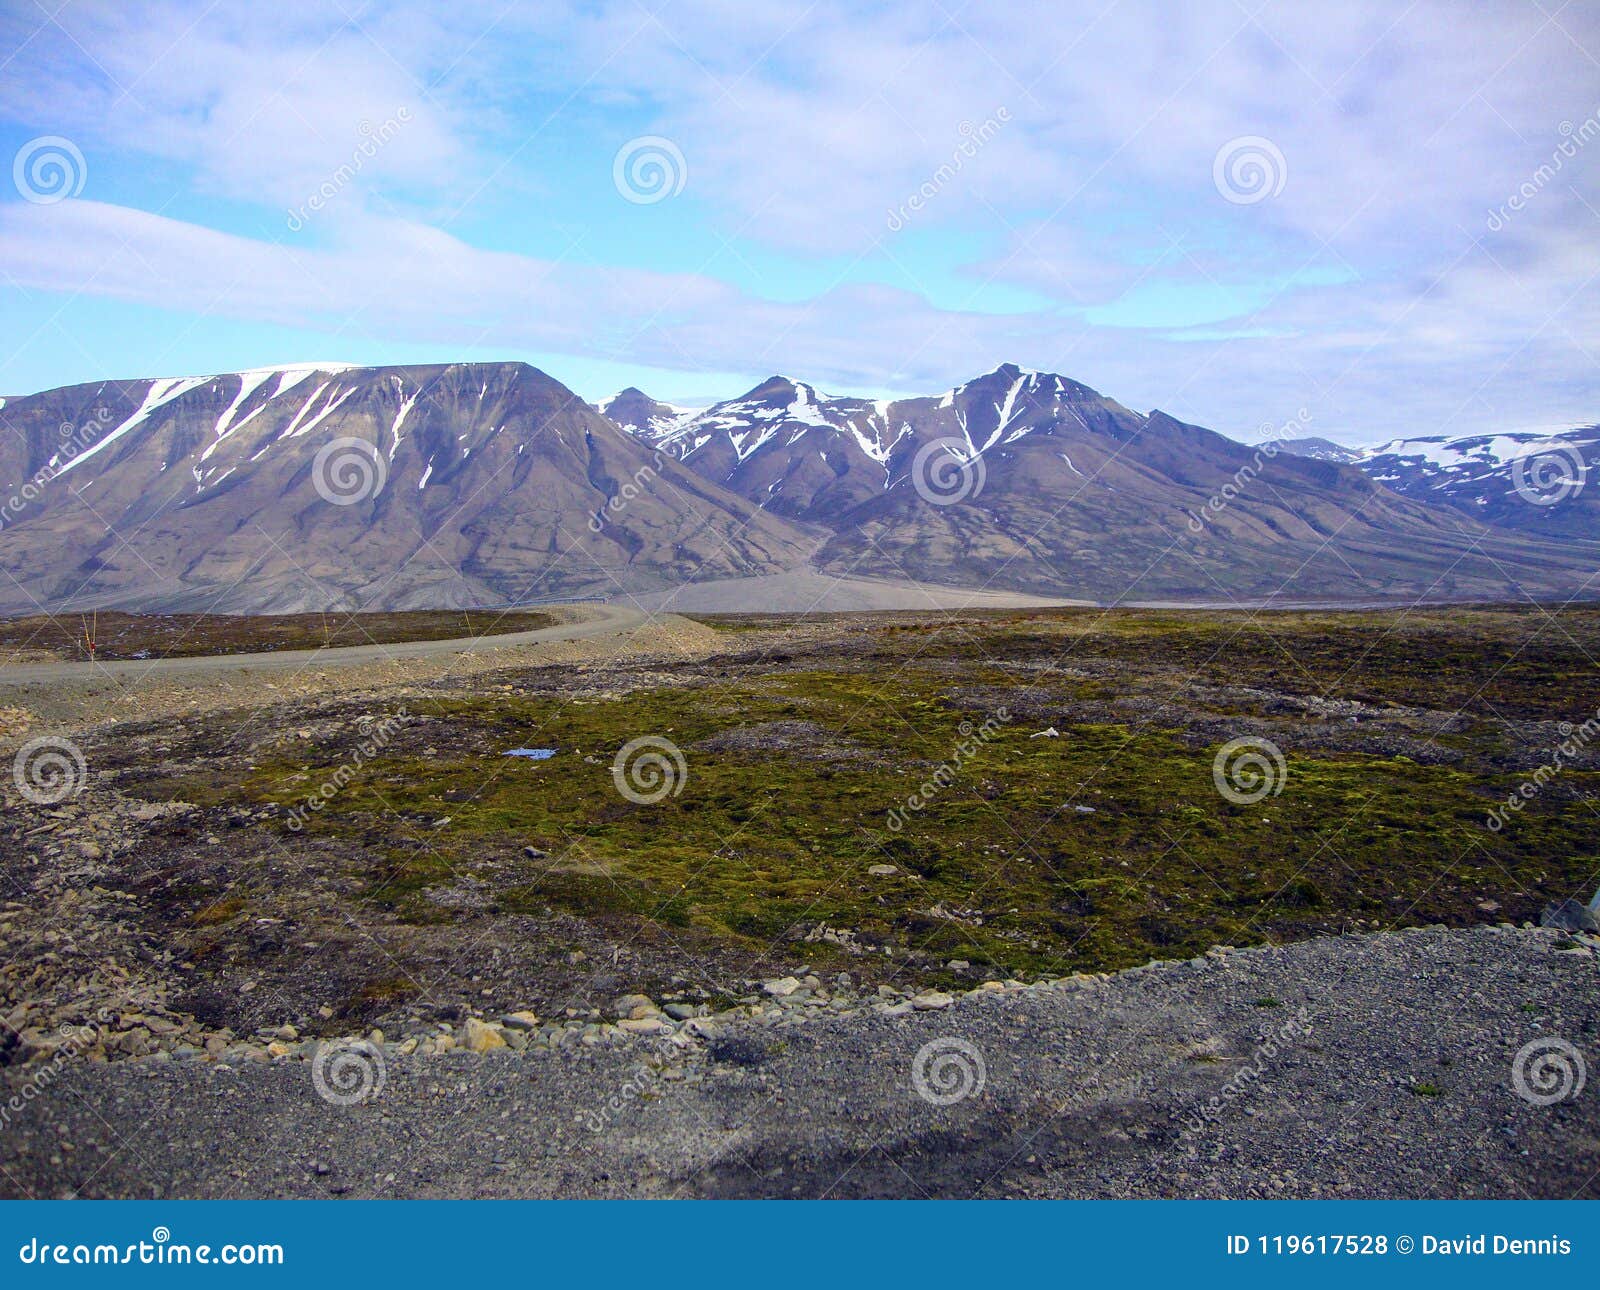 mountains and melting permafrost on spitzbergen, norway